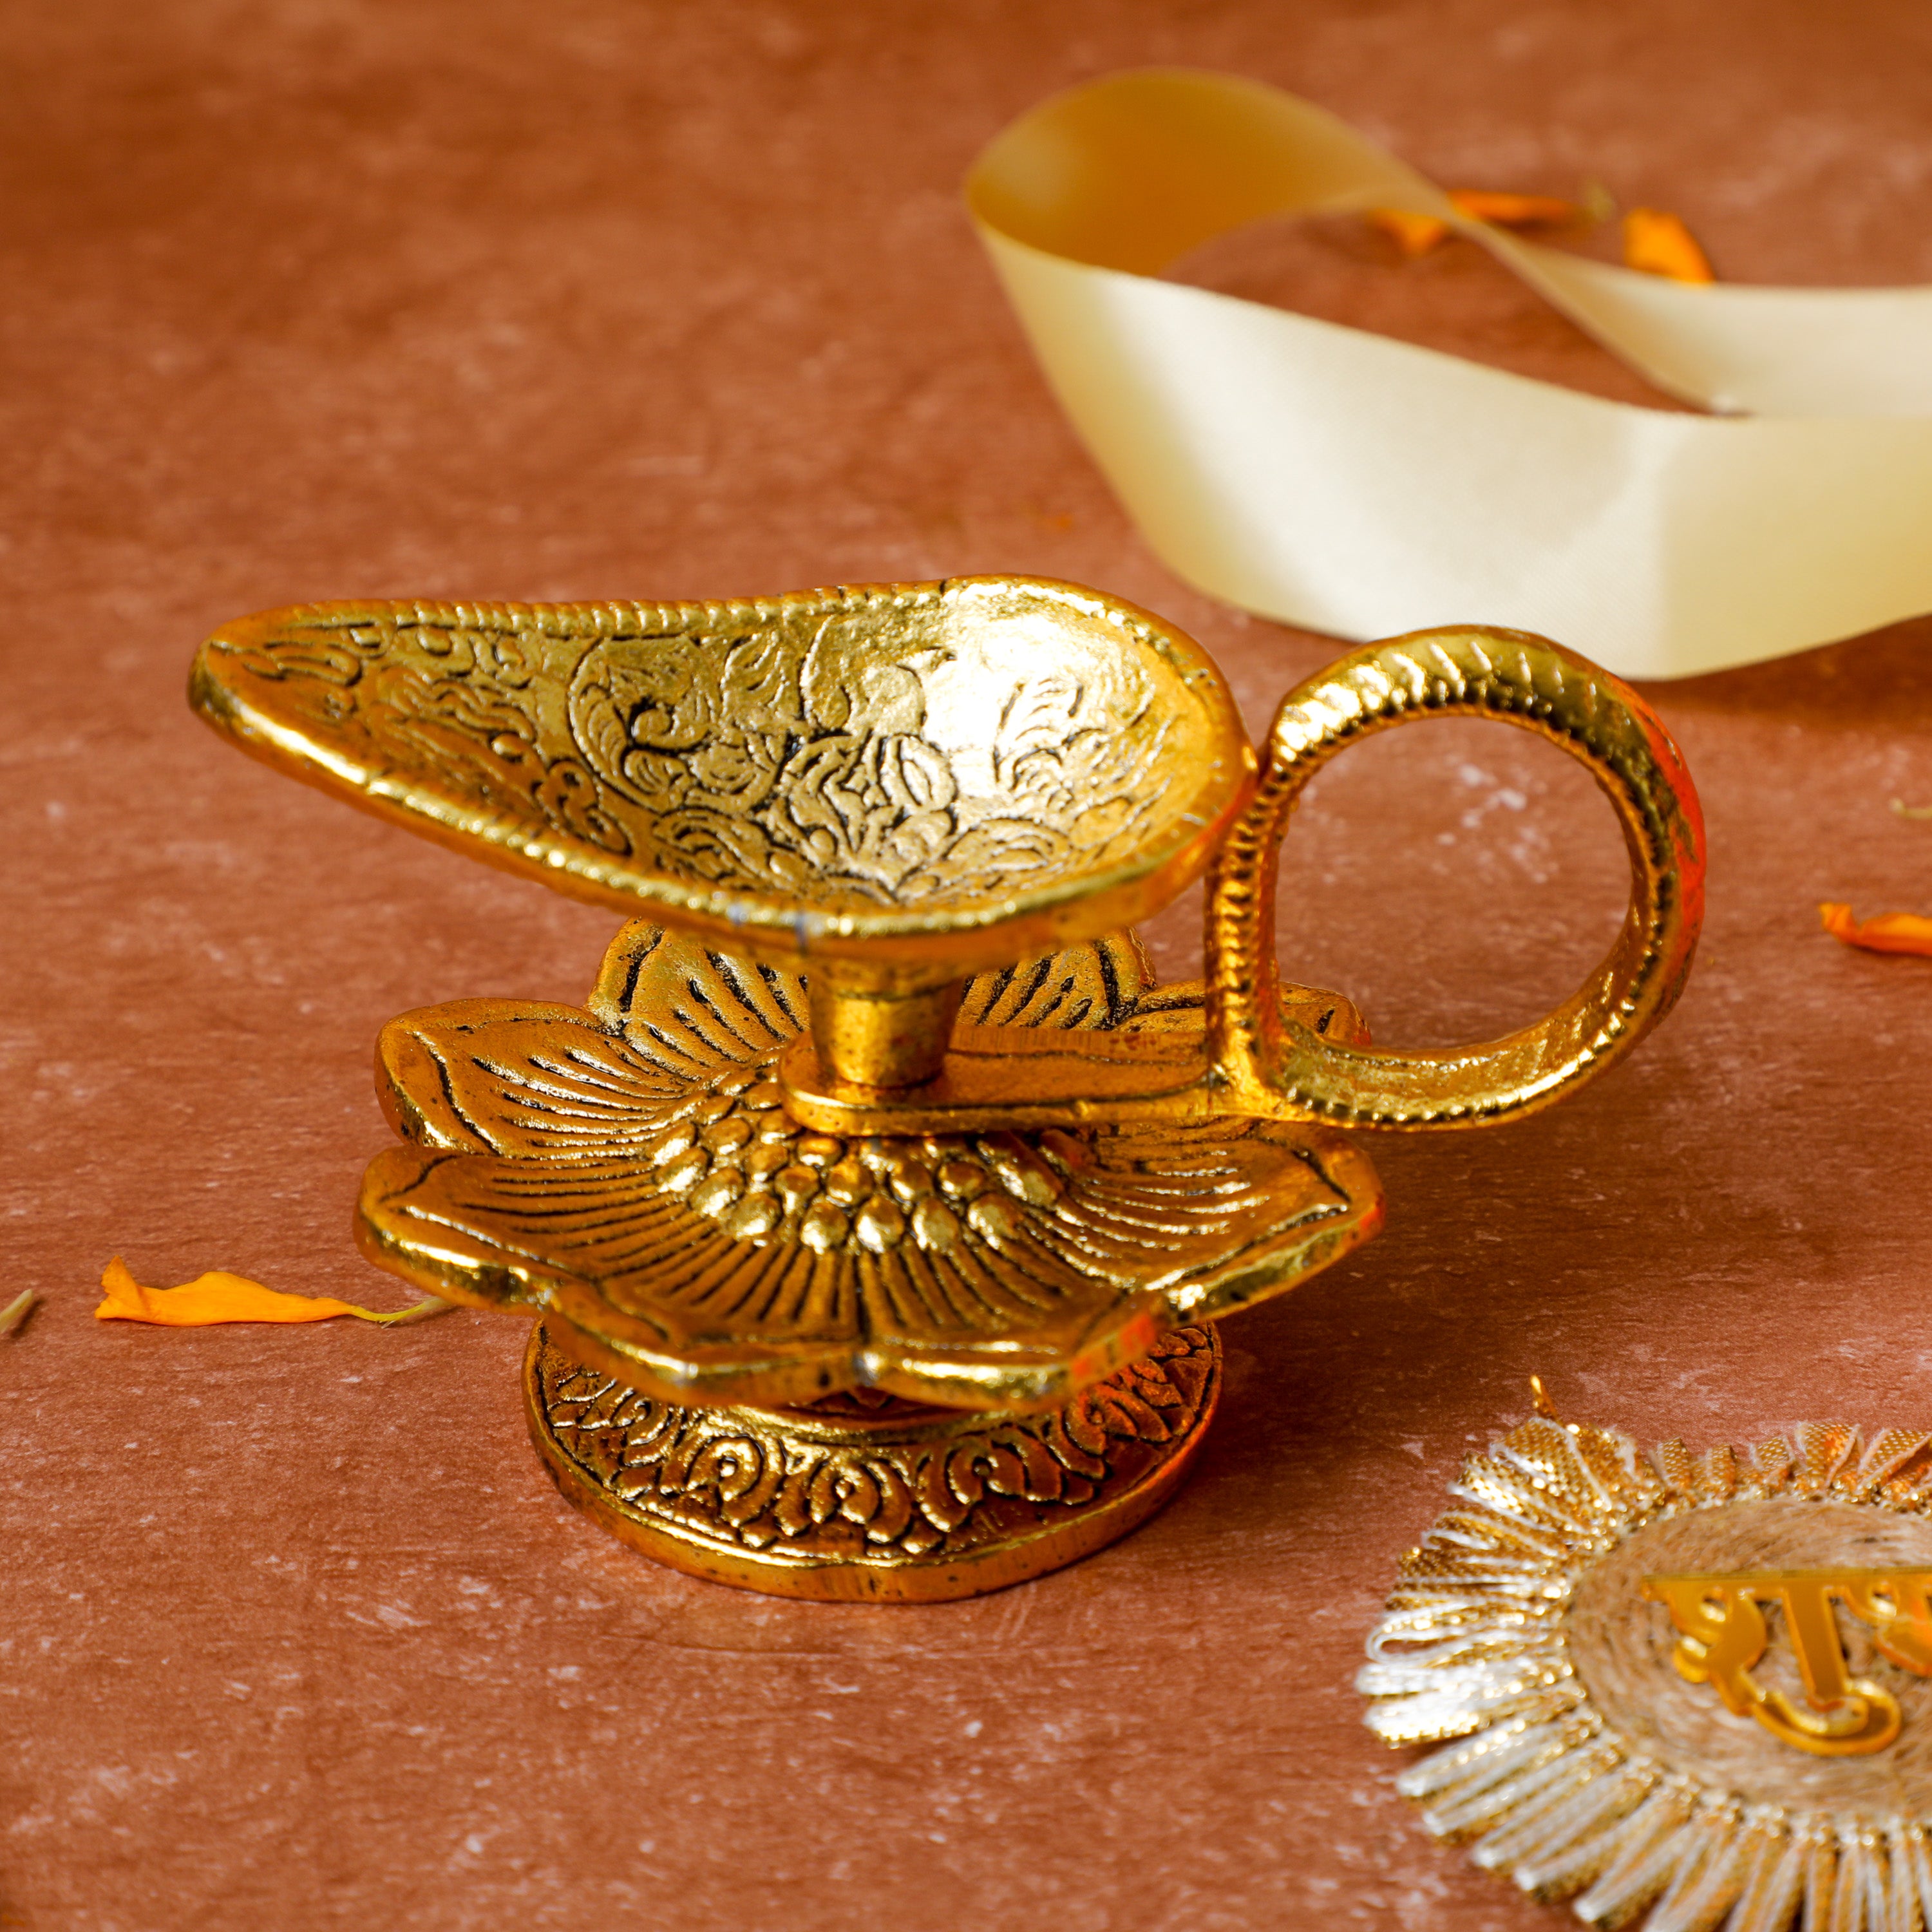 wick aarti made of high quality metal alloy is intricately engraved with beautiful traditional design